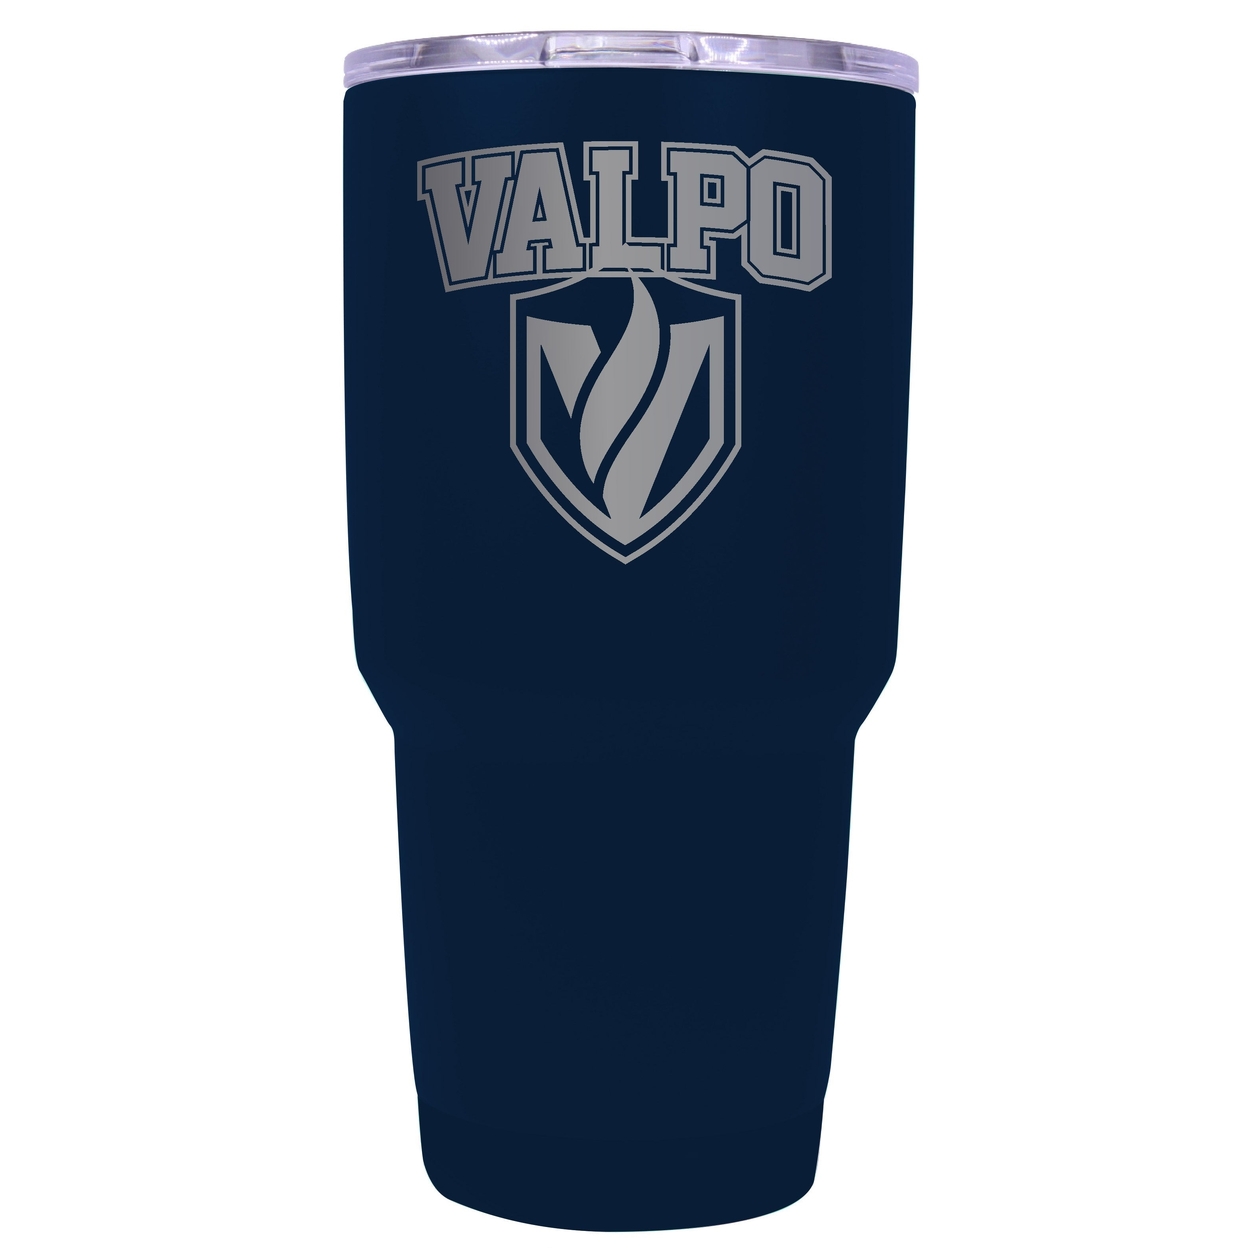 Winston Salem State 24 Oz Laser Engraved Stainless Steel Insulated Tumbler - Choose Your Color. - Navy